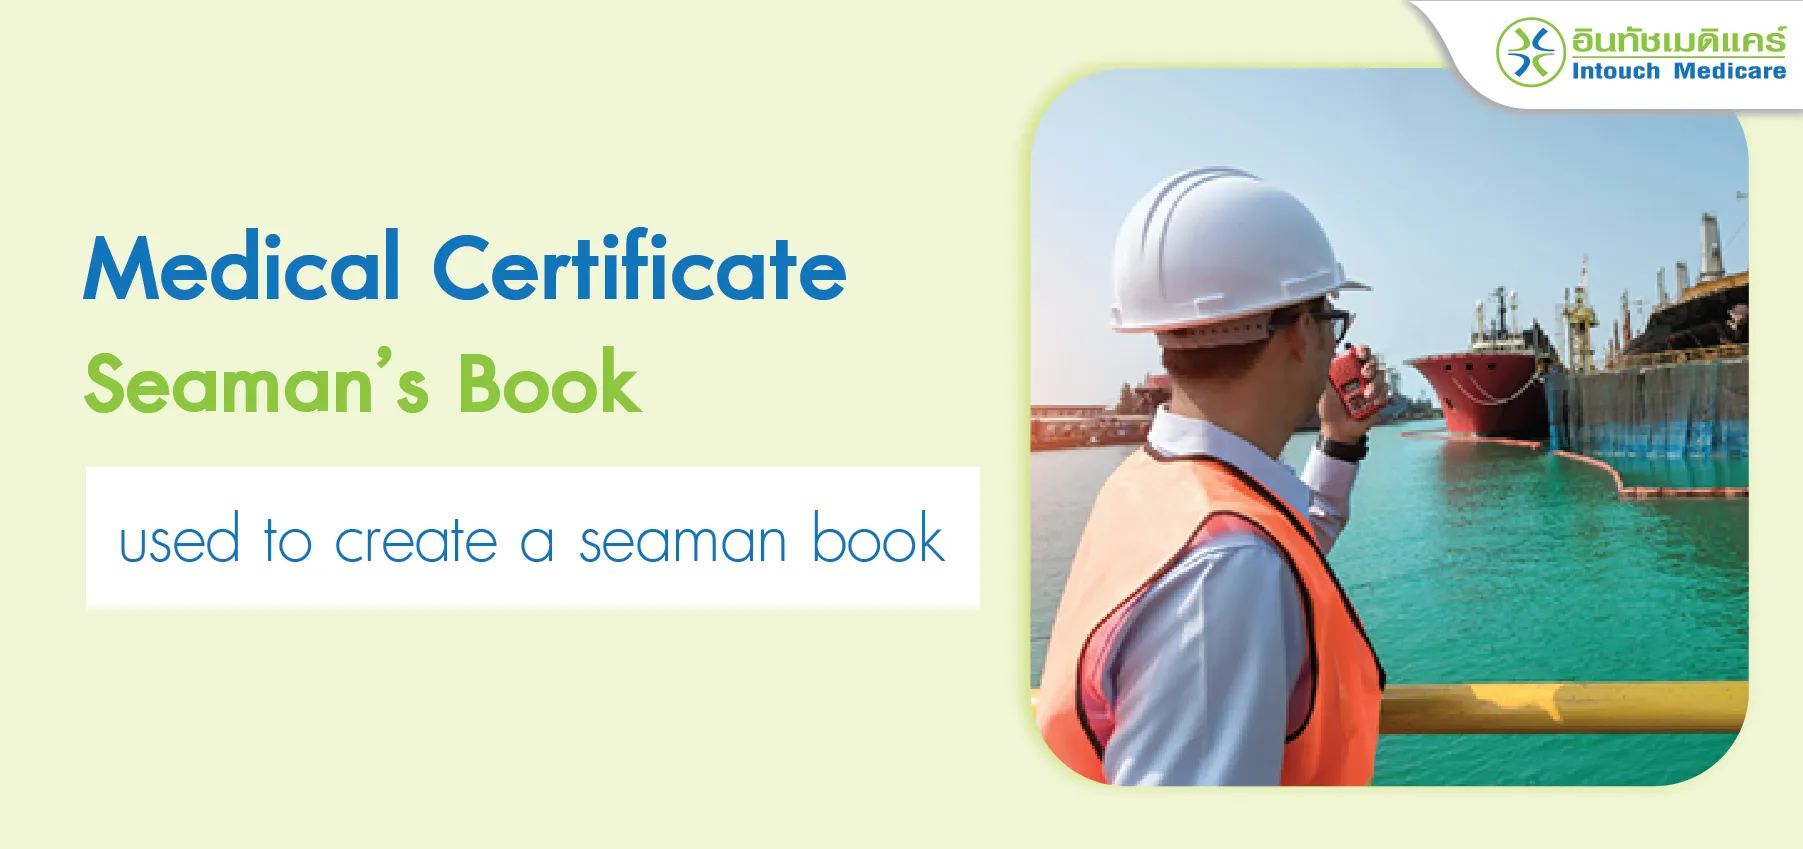 Medical certificate for a seaman's book used to create a seafarer's book